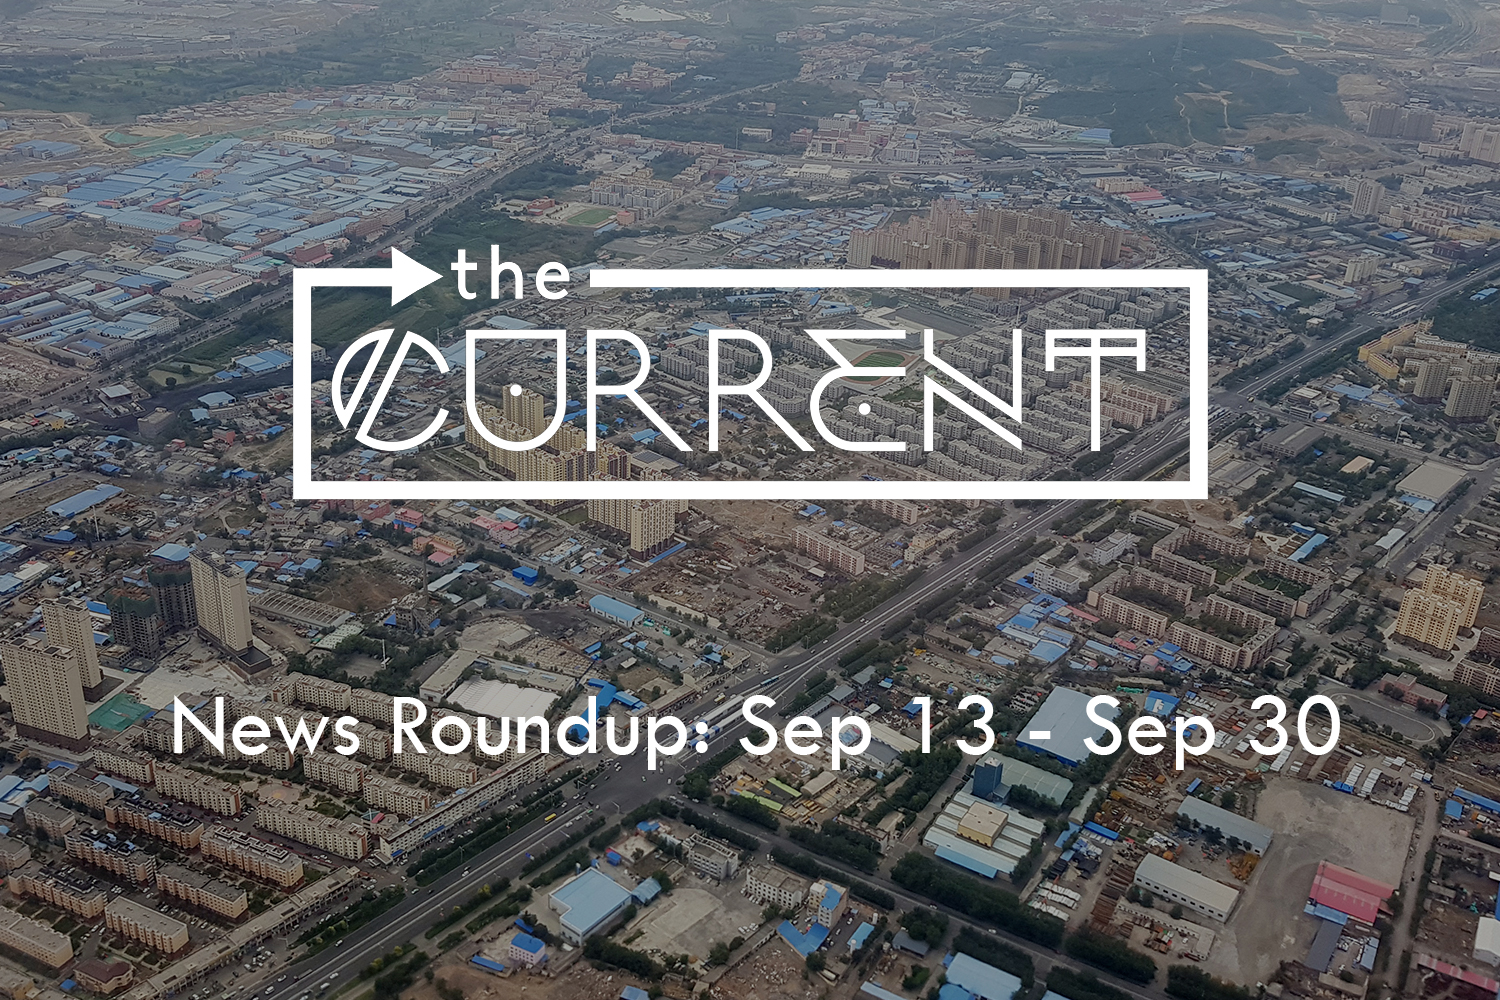 "The Current" for September 13th through September 30th over an image of an aerial view above Xinjiang, China.